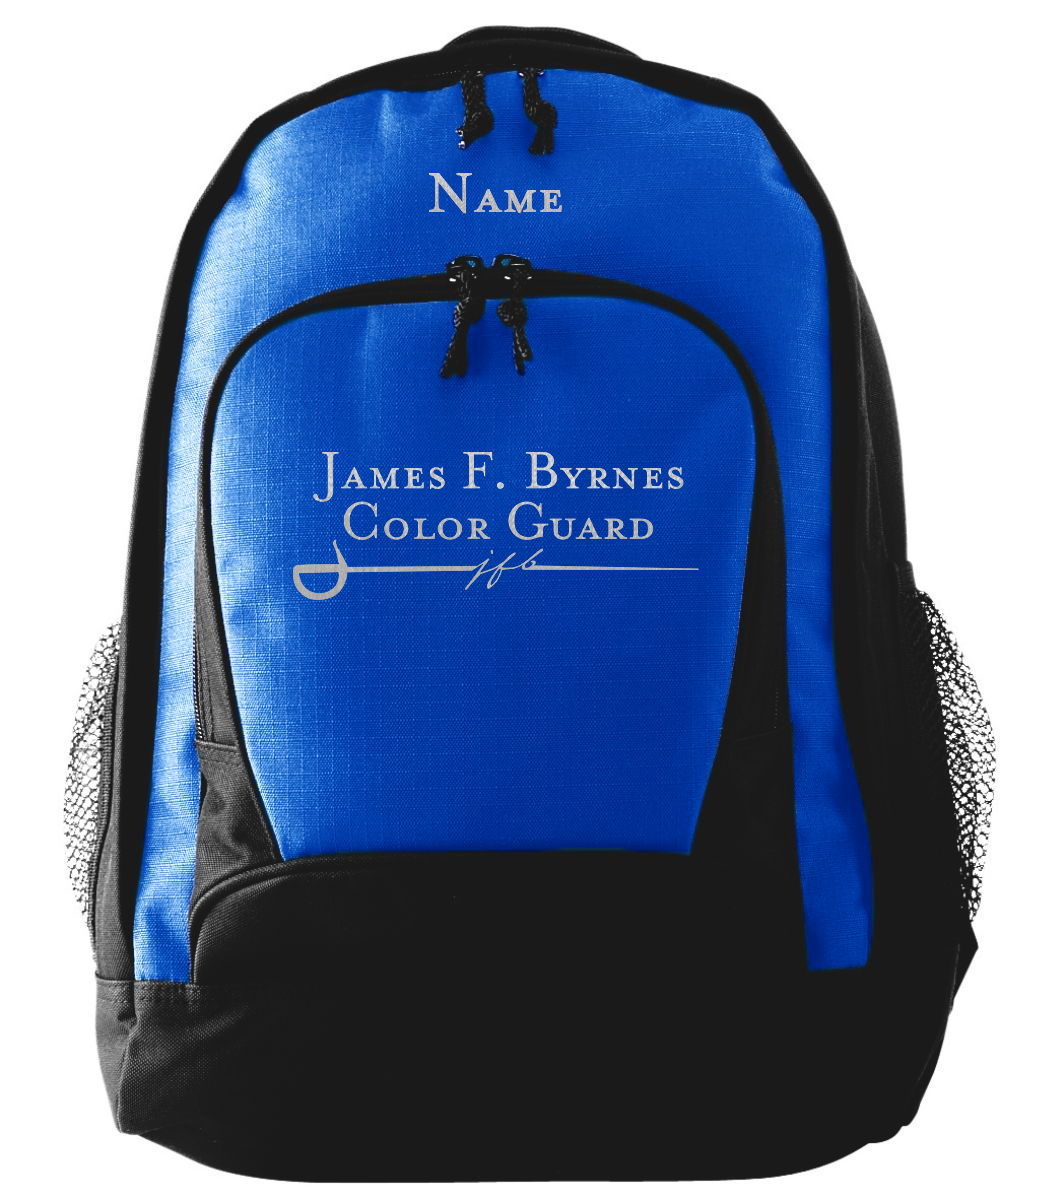 Byrnes Ripstop Backpack w/ Name & Logo Embroidery